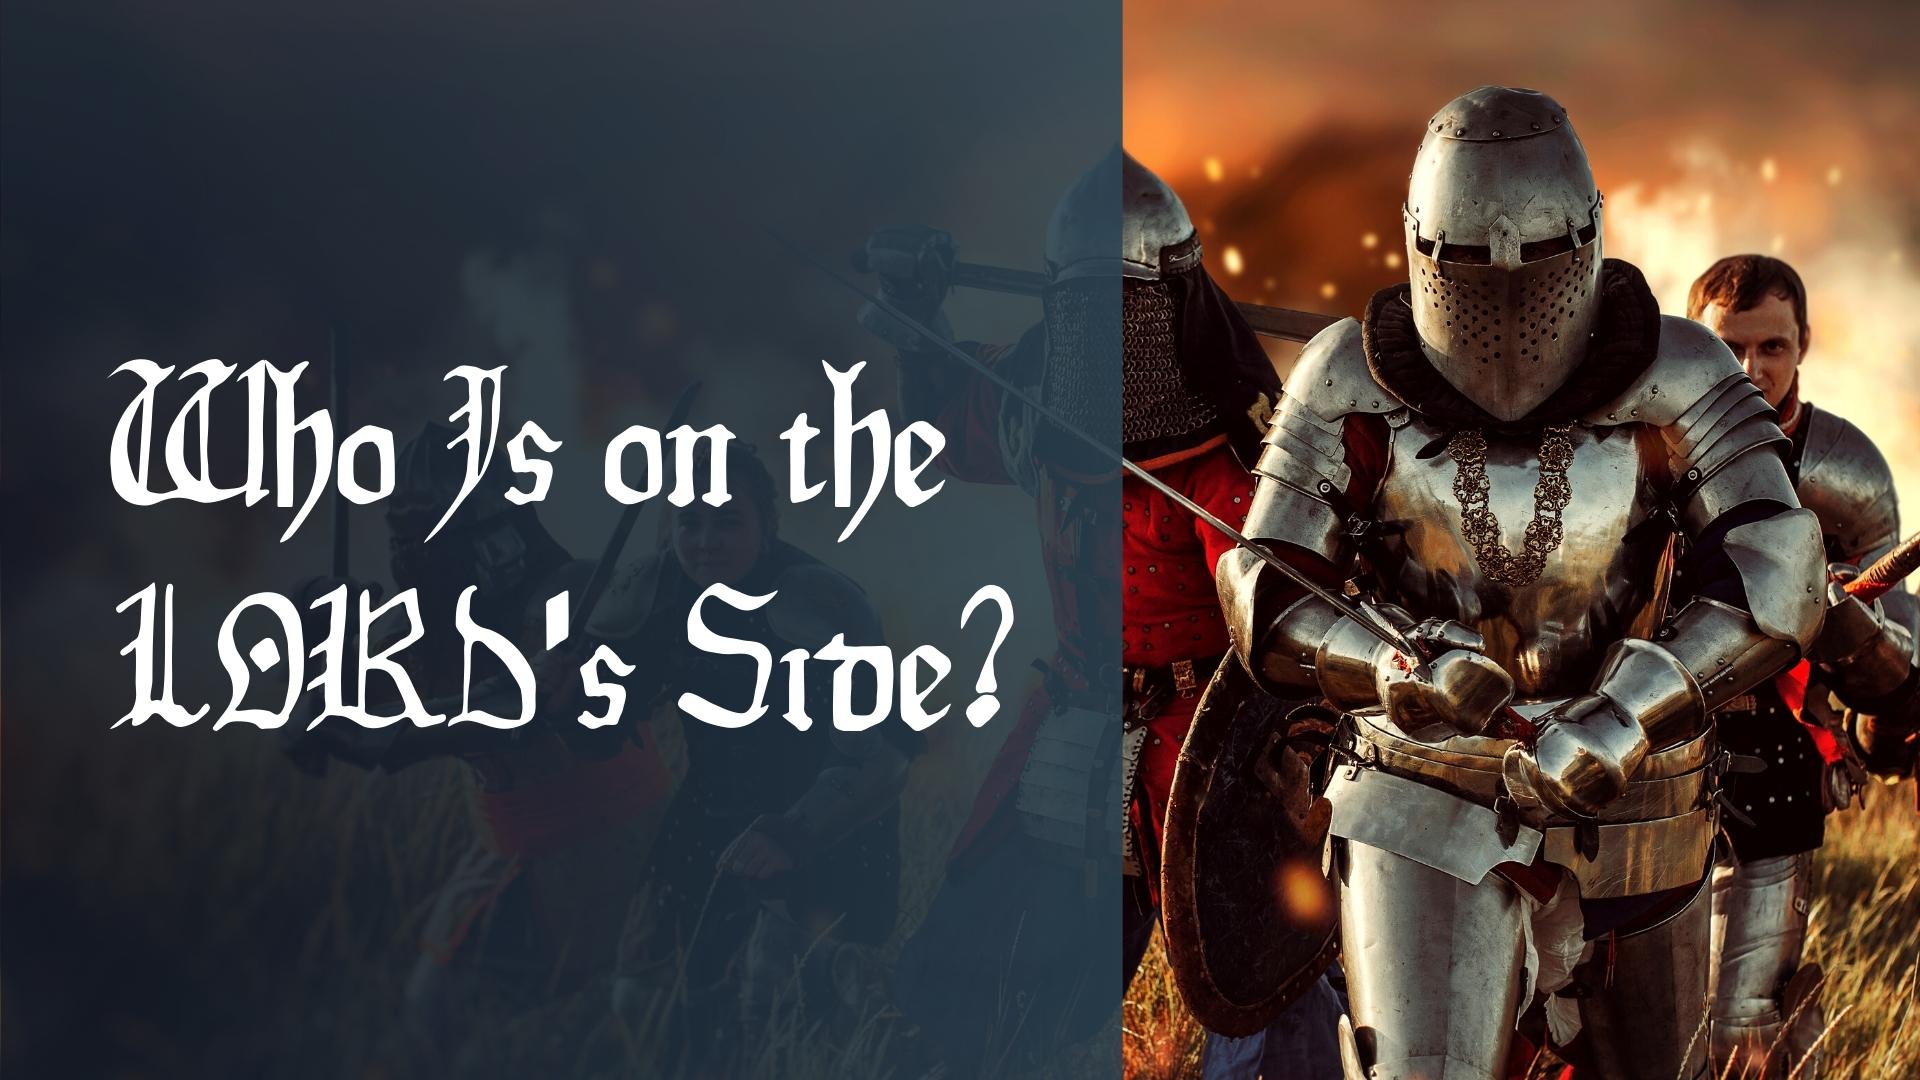 Who is on the LORD's side? Question and image of armored medieval soldier carrying a sword